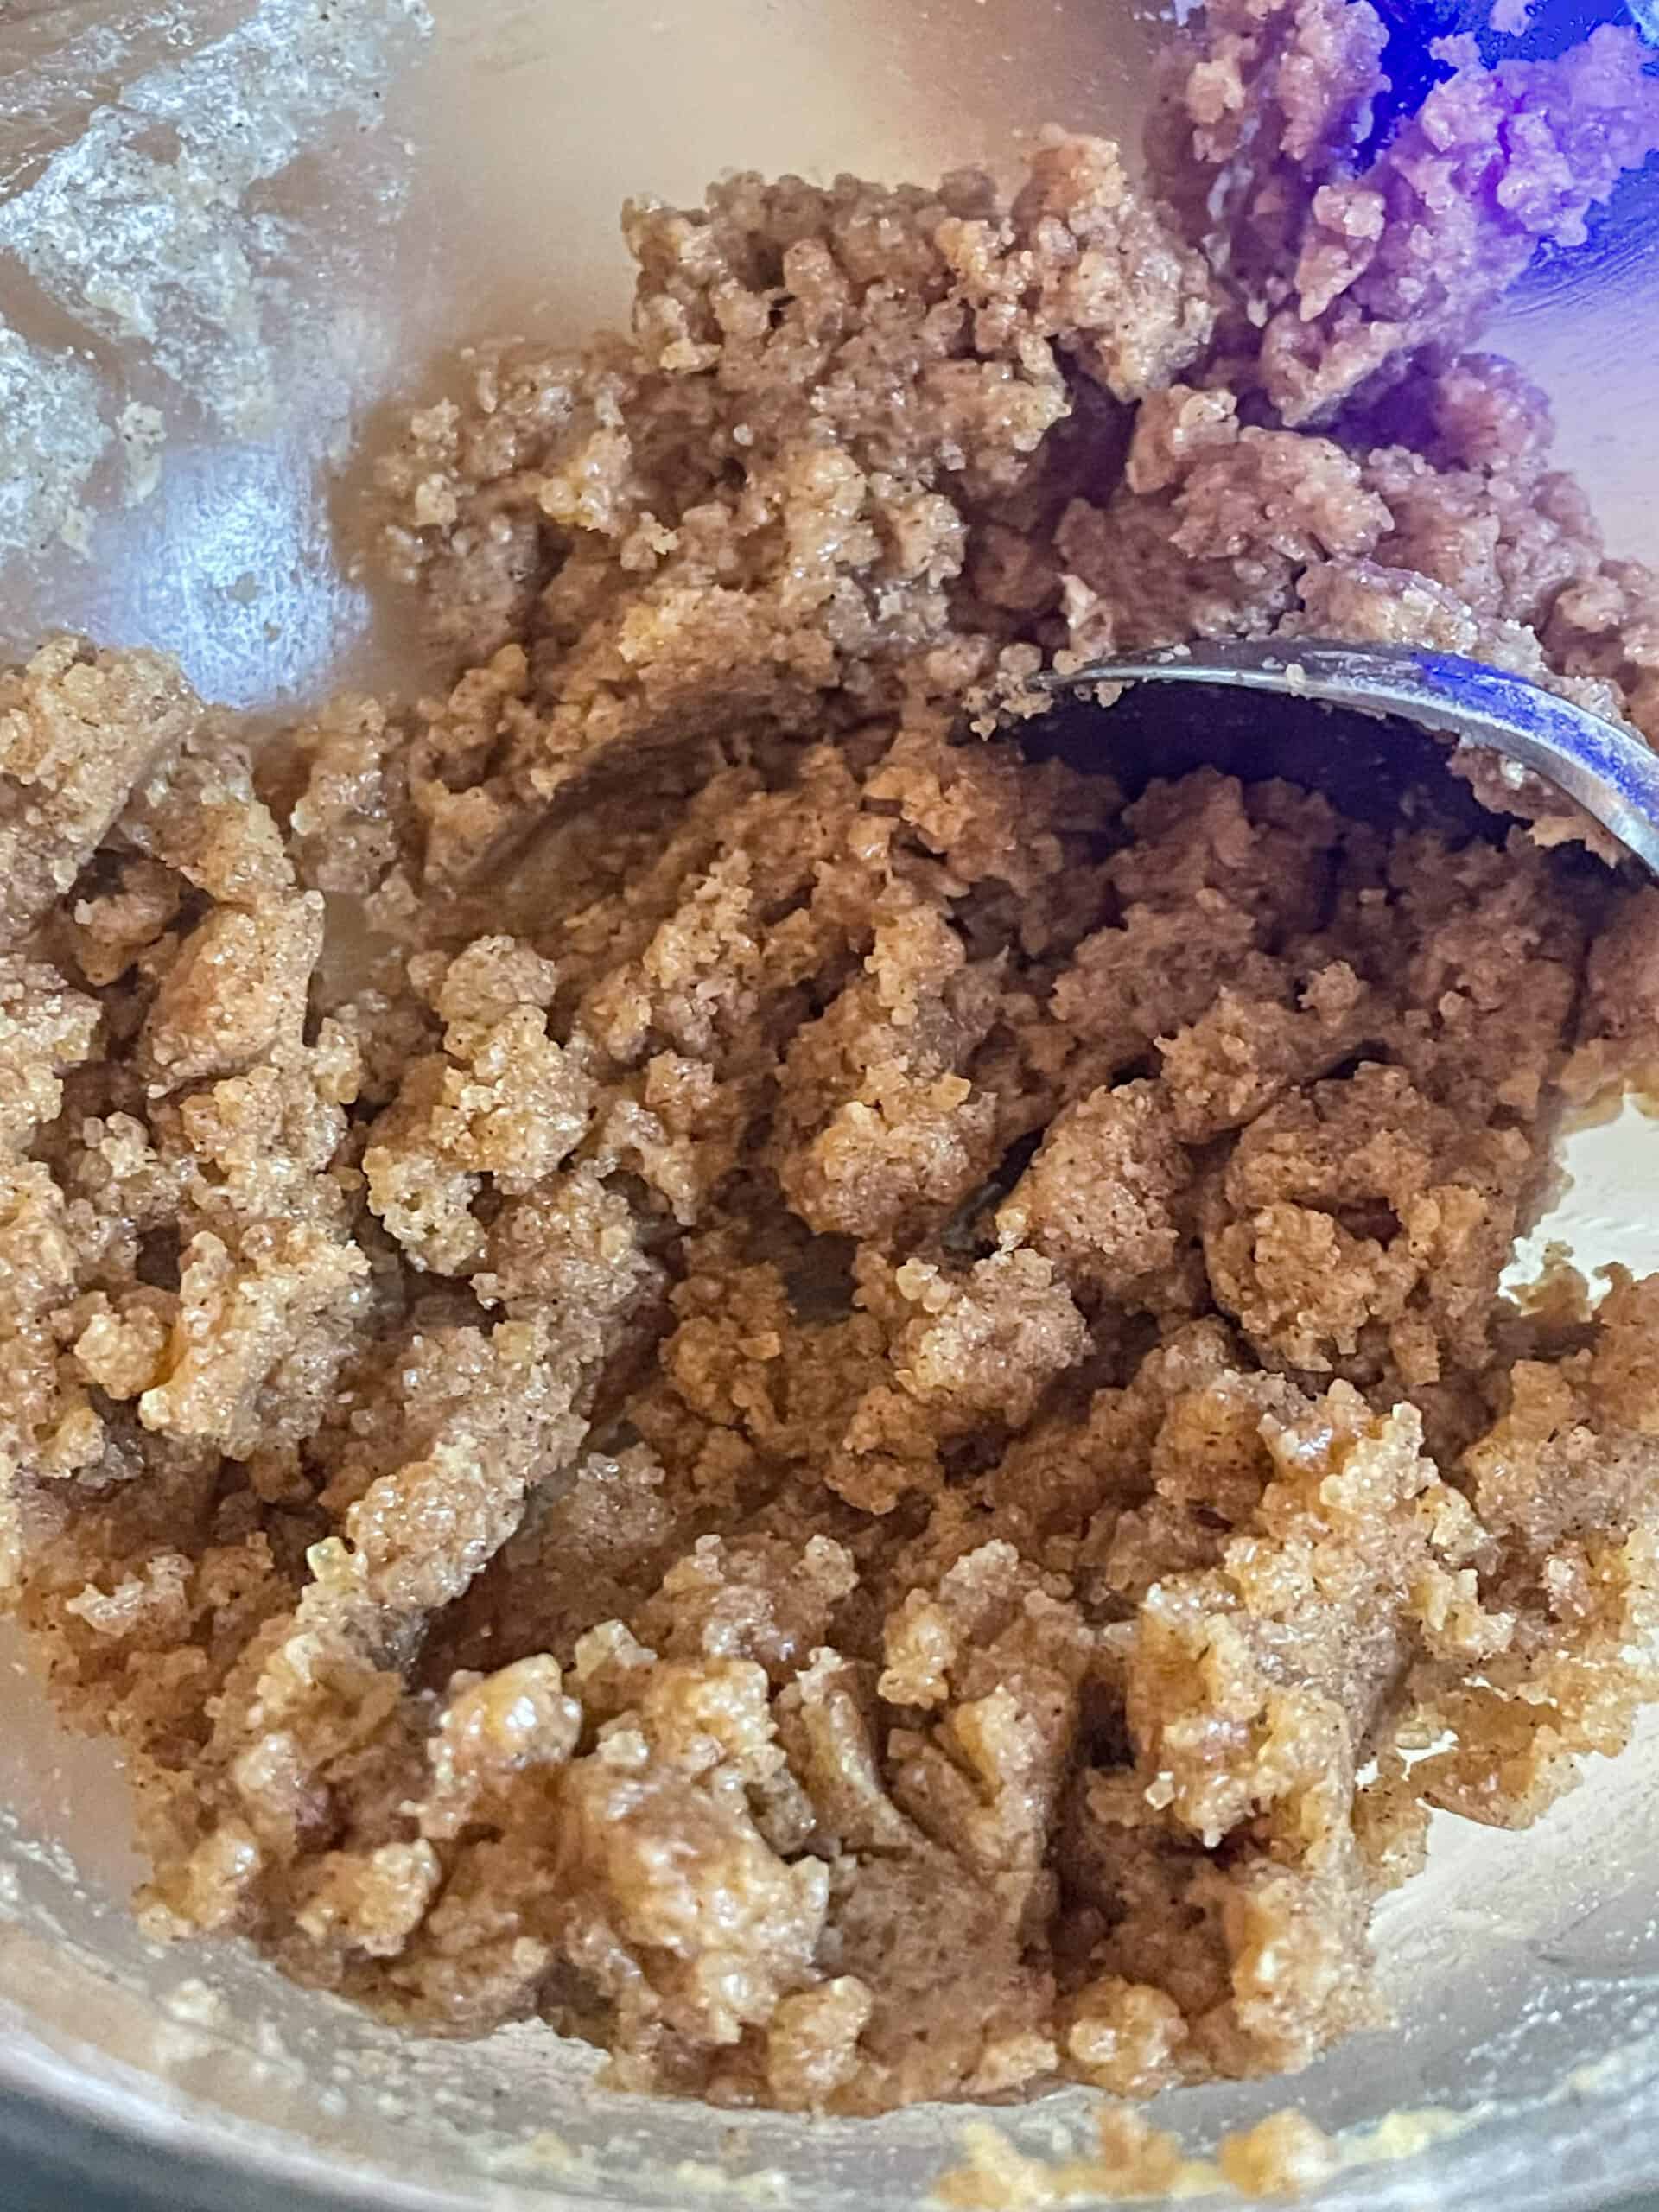 Crumble topping ingredients stirred together and formed into a crumble.